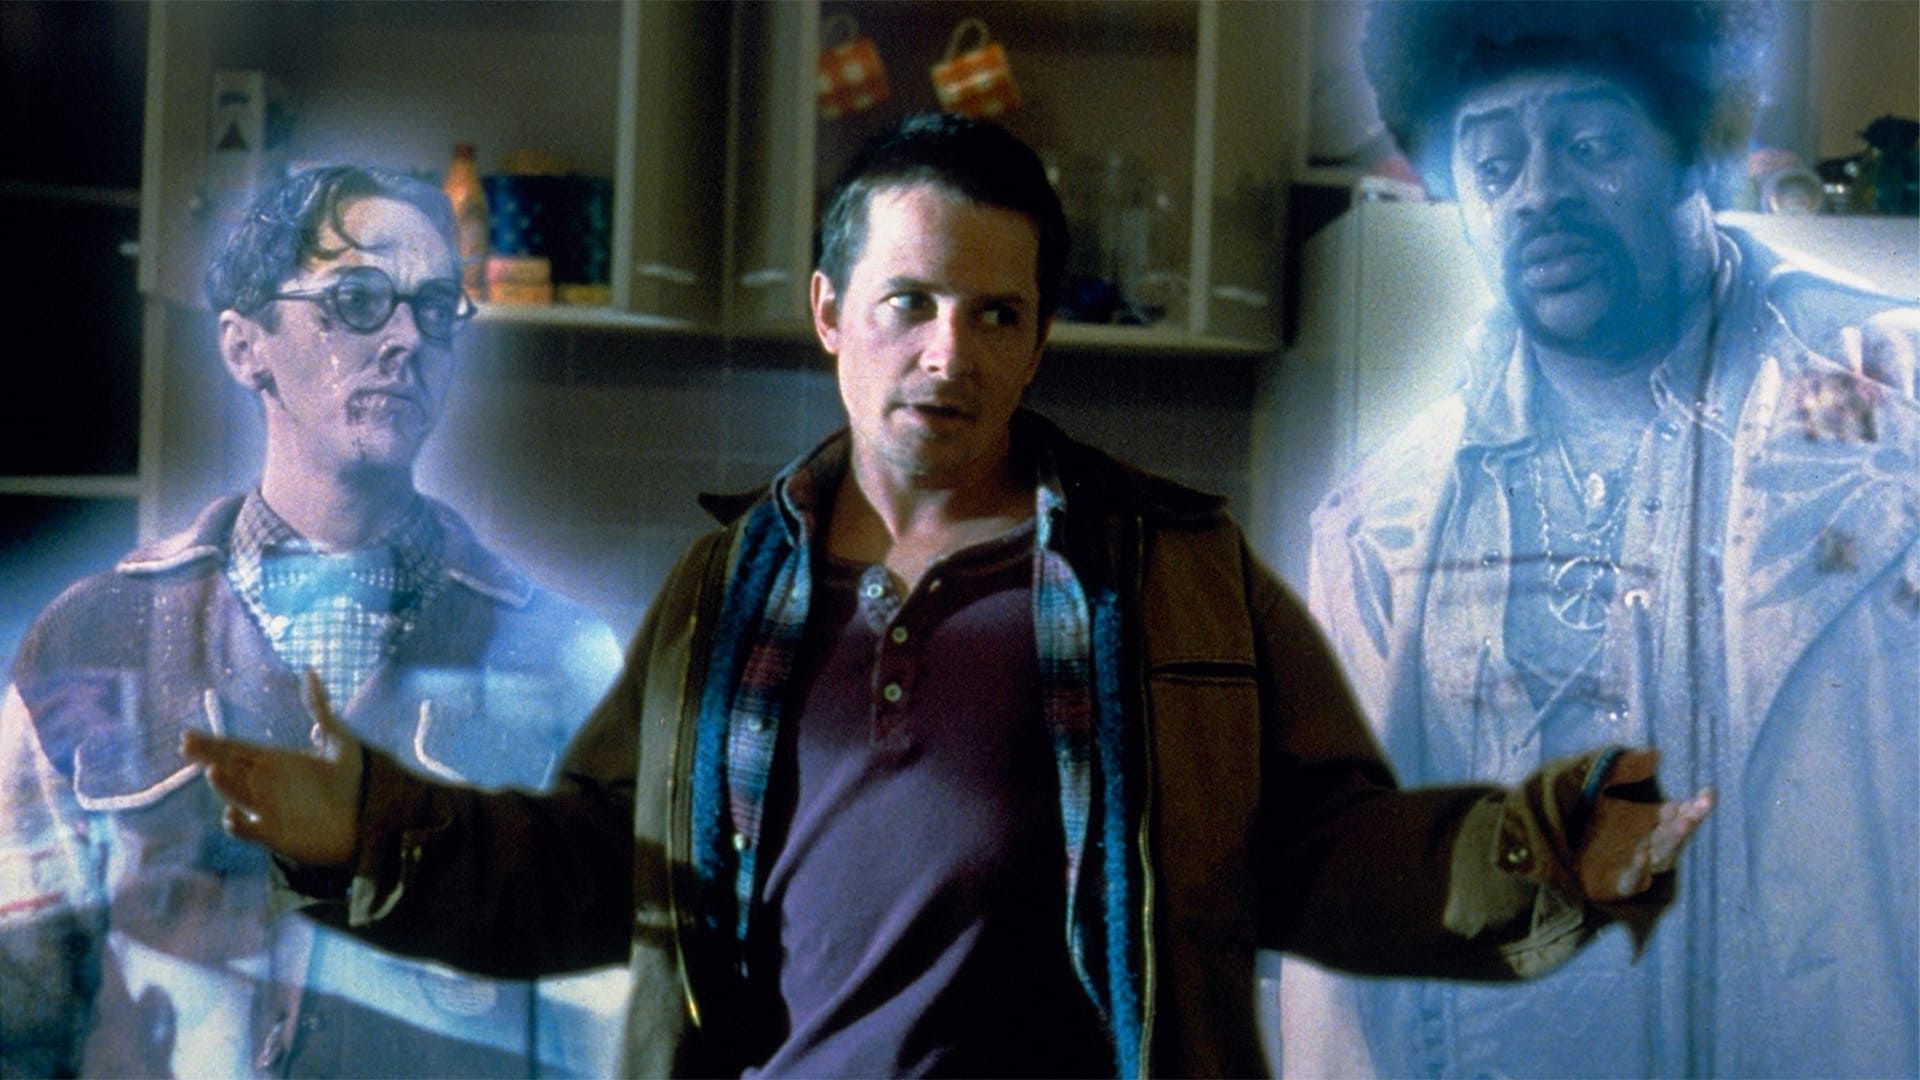 No Way to Make a Living: A Look Back at 'The Frighteners' background